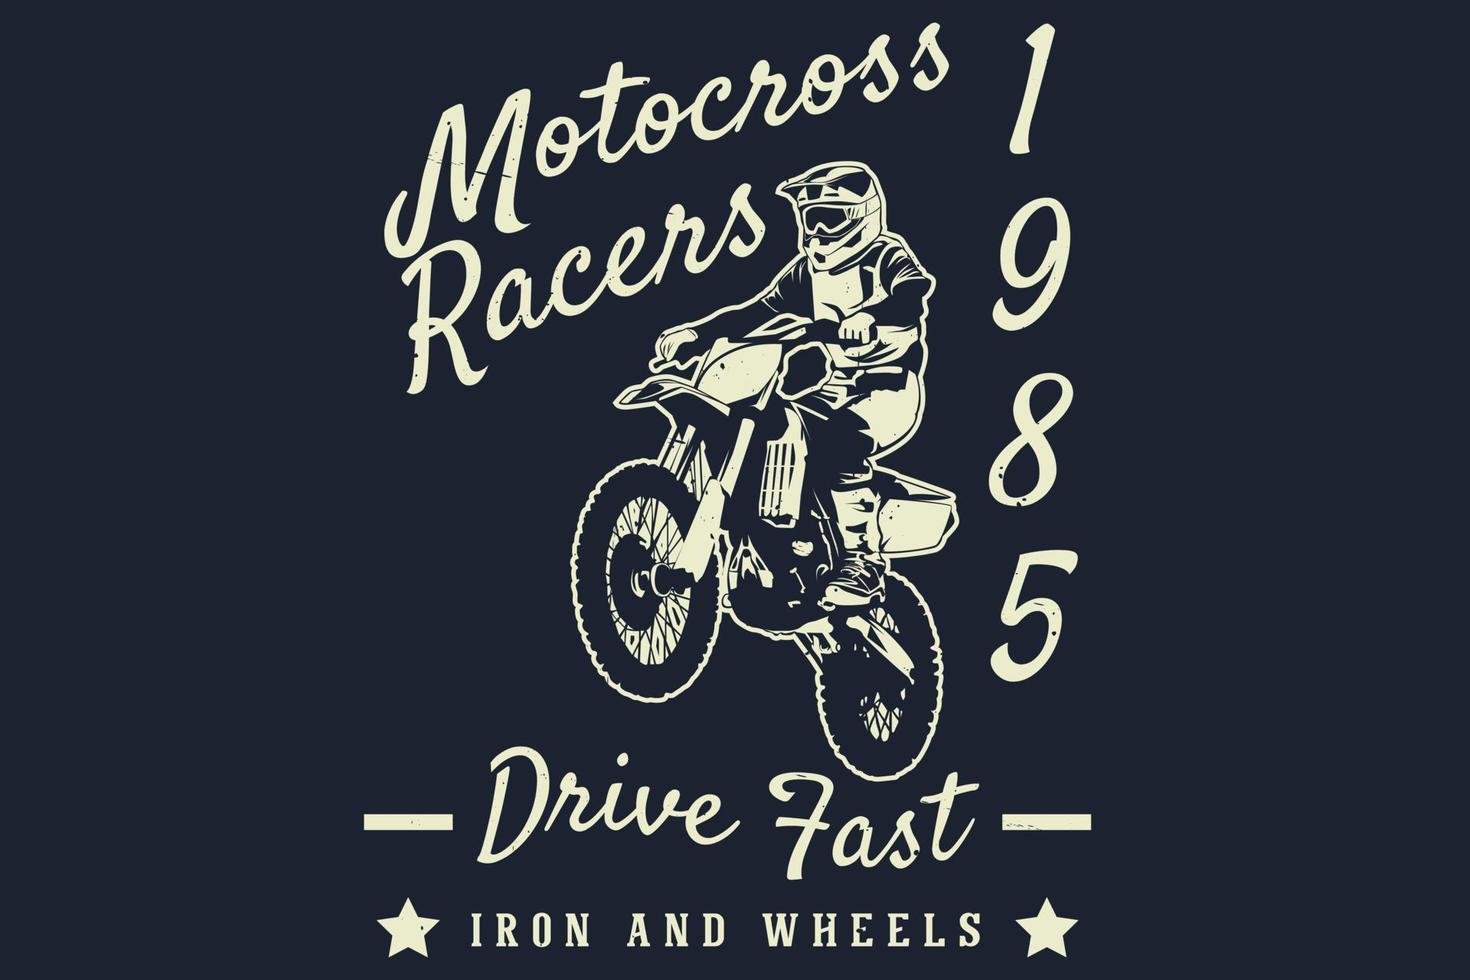 Motocross racers drive fast iron and wheels silhouette design vector